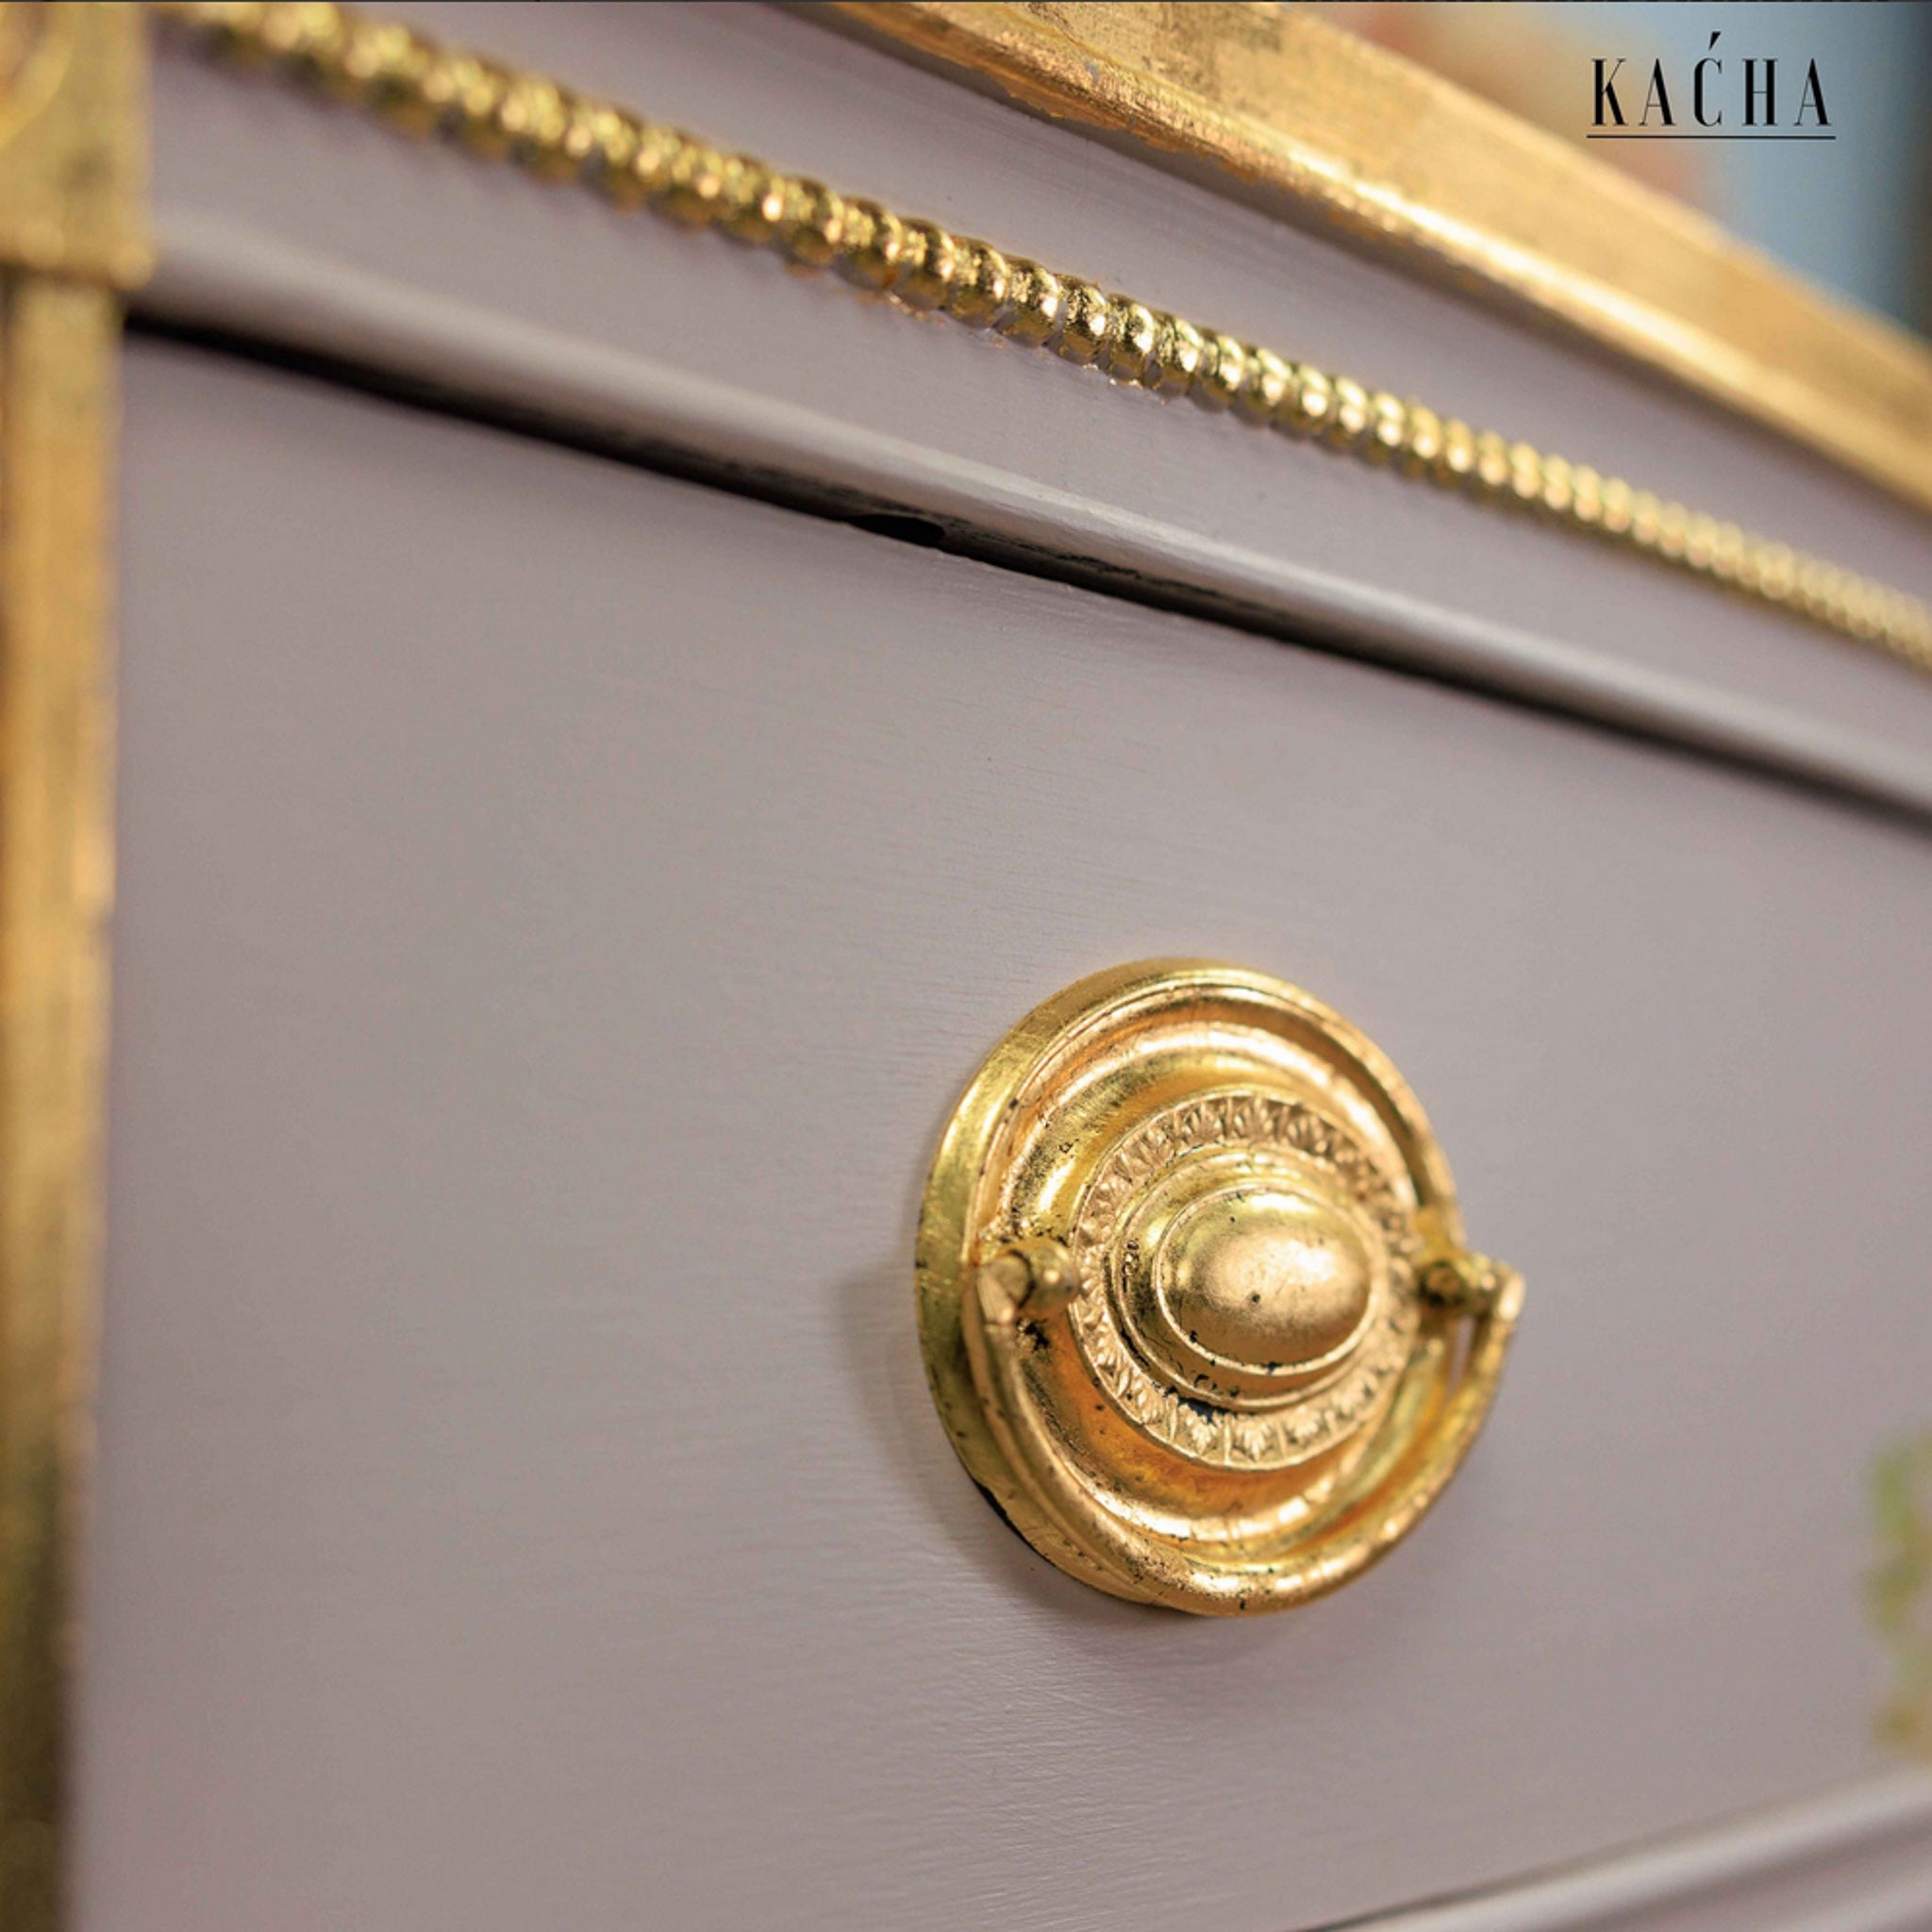 A close-up view of a vintage dresser refurbished by Kacha is painted a soft rose pink and features the Imitation Gold Leaf Foil on the trims and knobs.